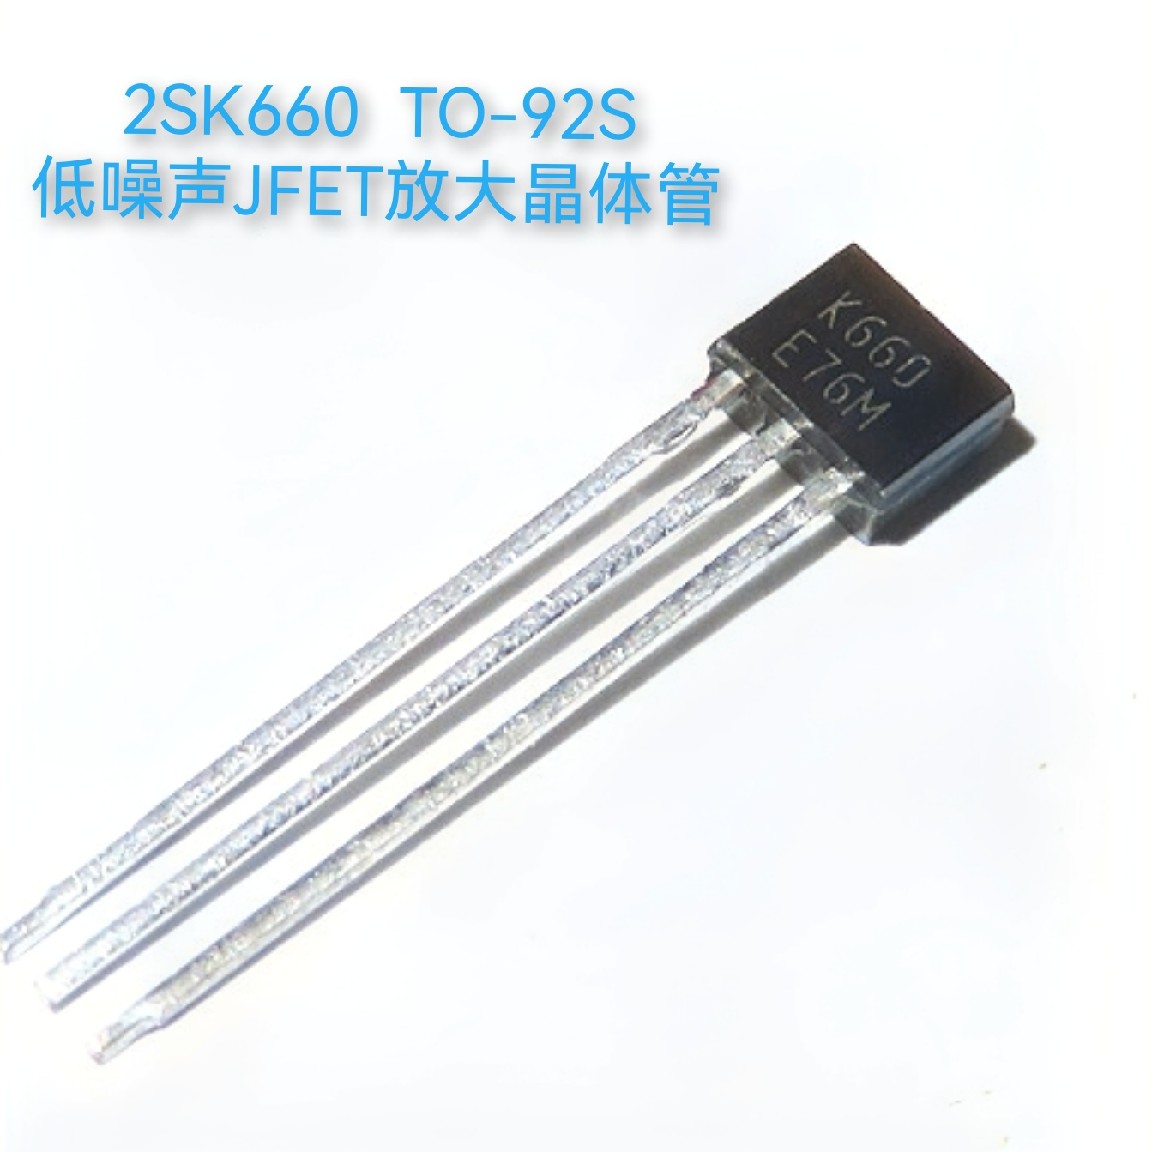 2SK660 TO-92S 5pcs/lot